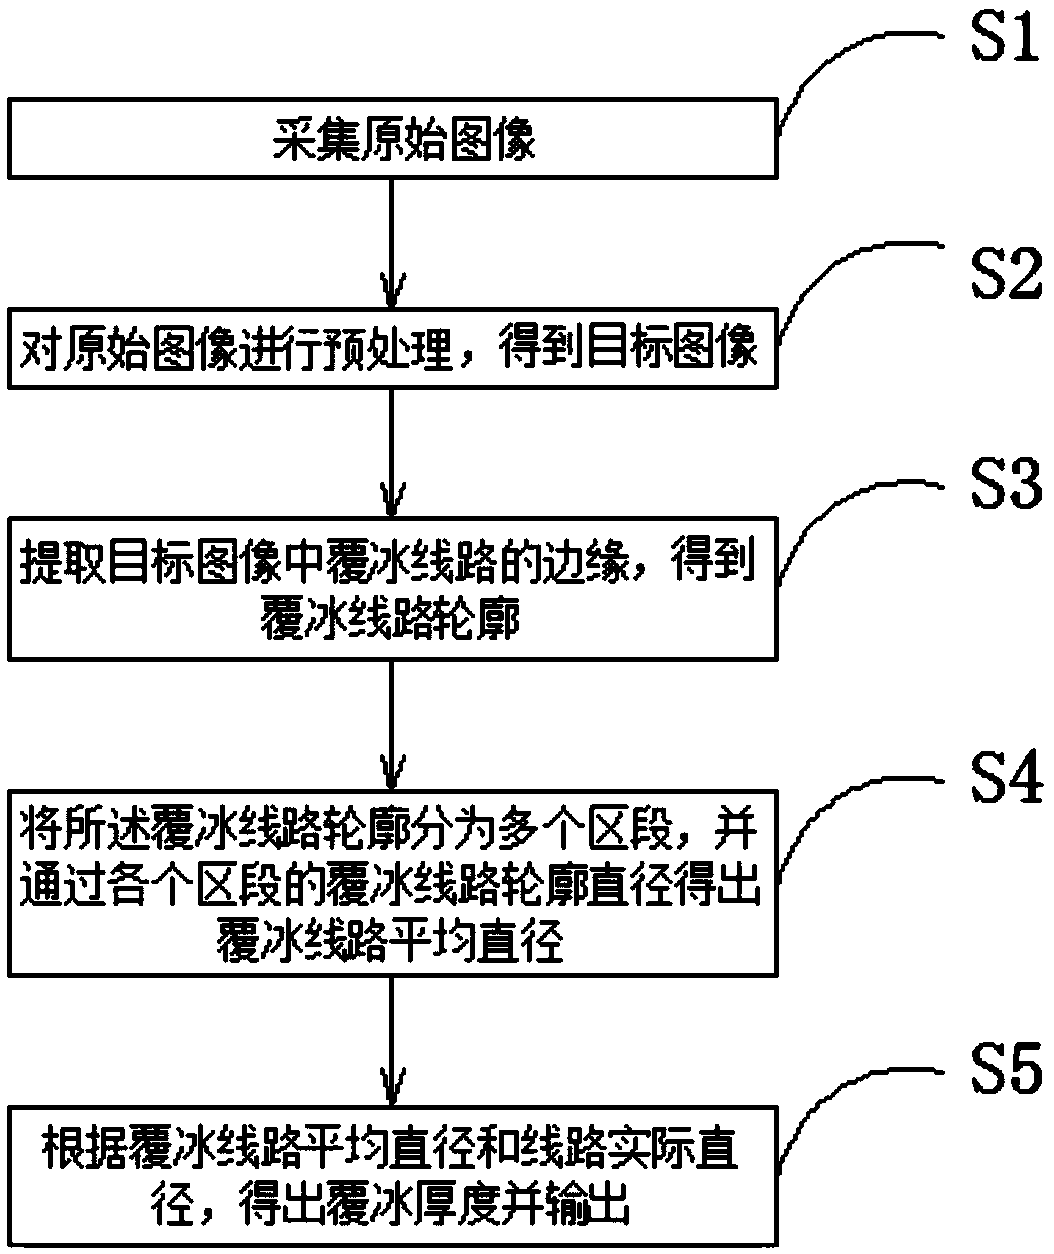 Transmission line icing detection method and system based on image processing